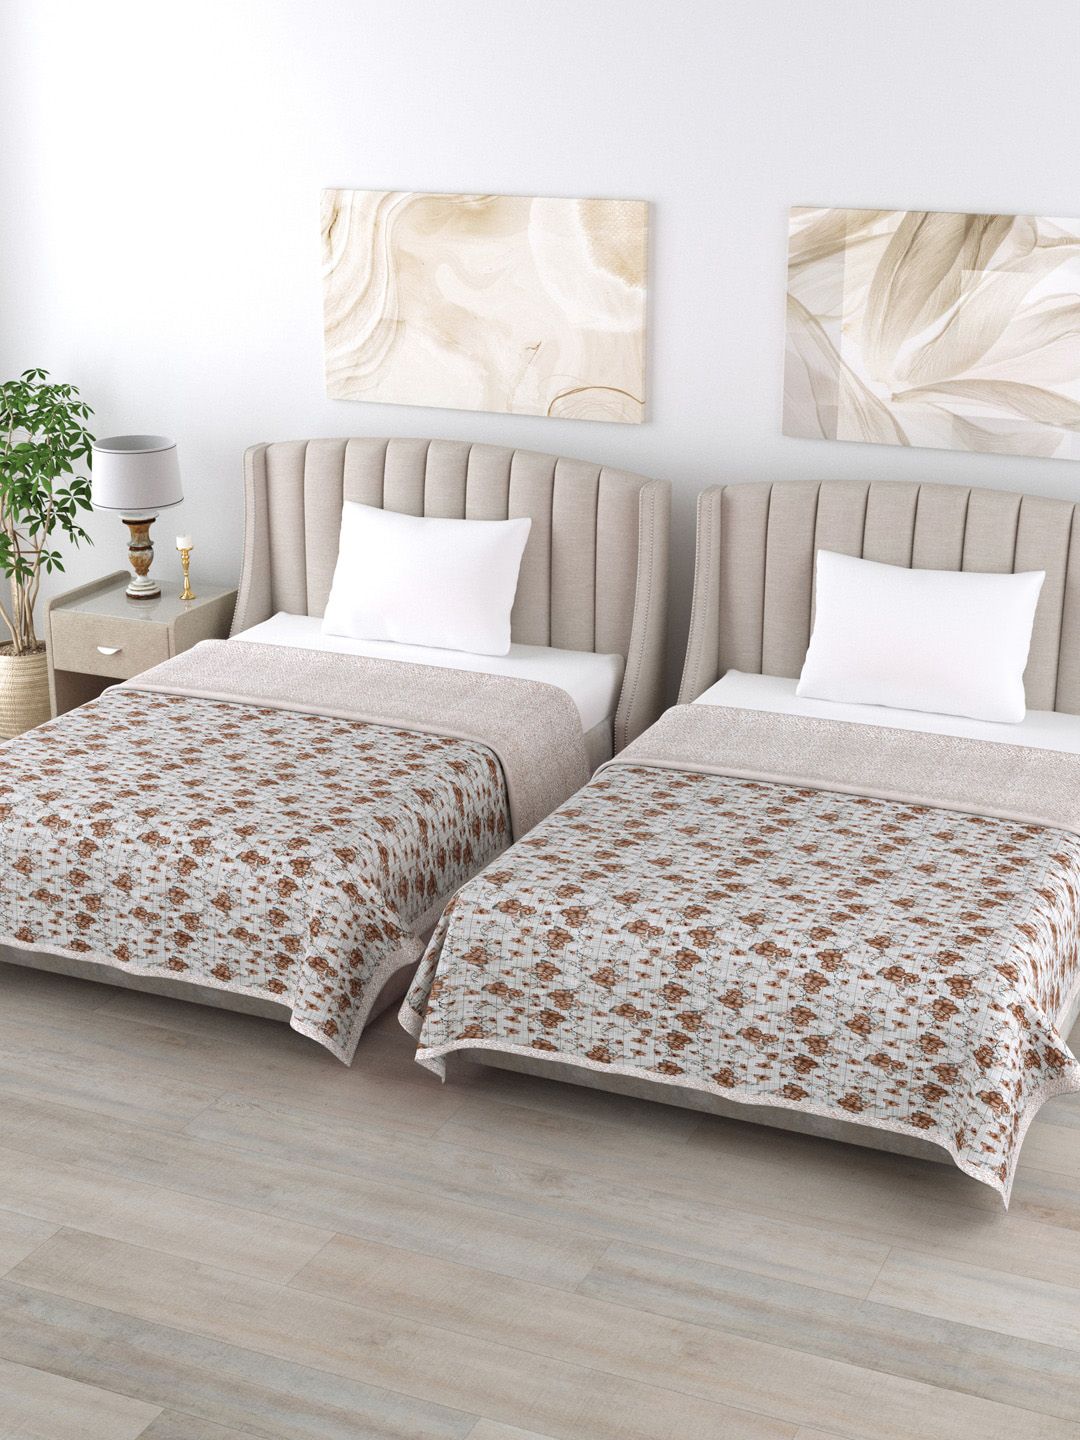 Home Fresh Unisex White & Brown Blankets Quilts and Dohars Price in India